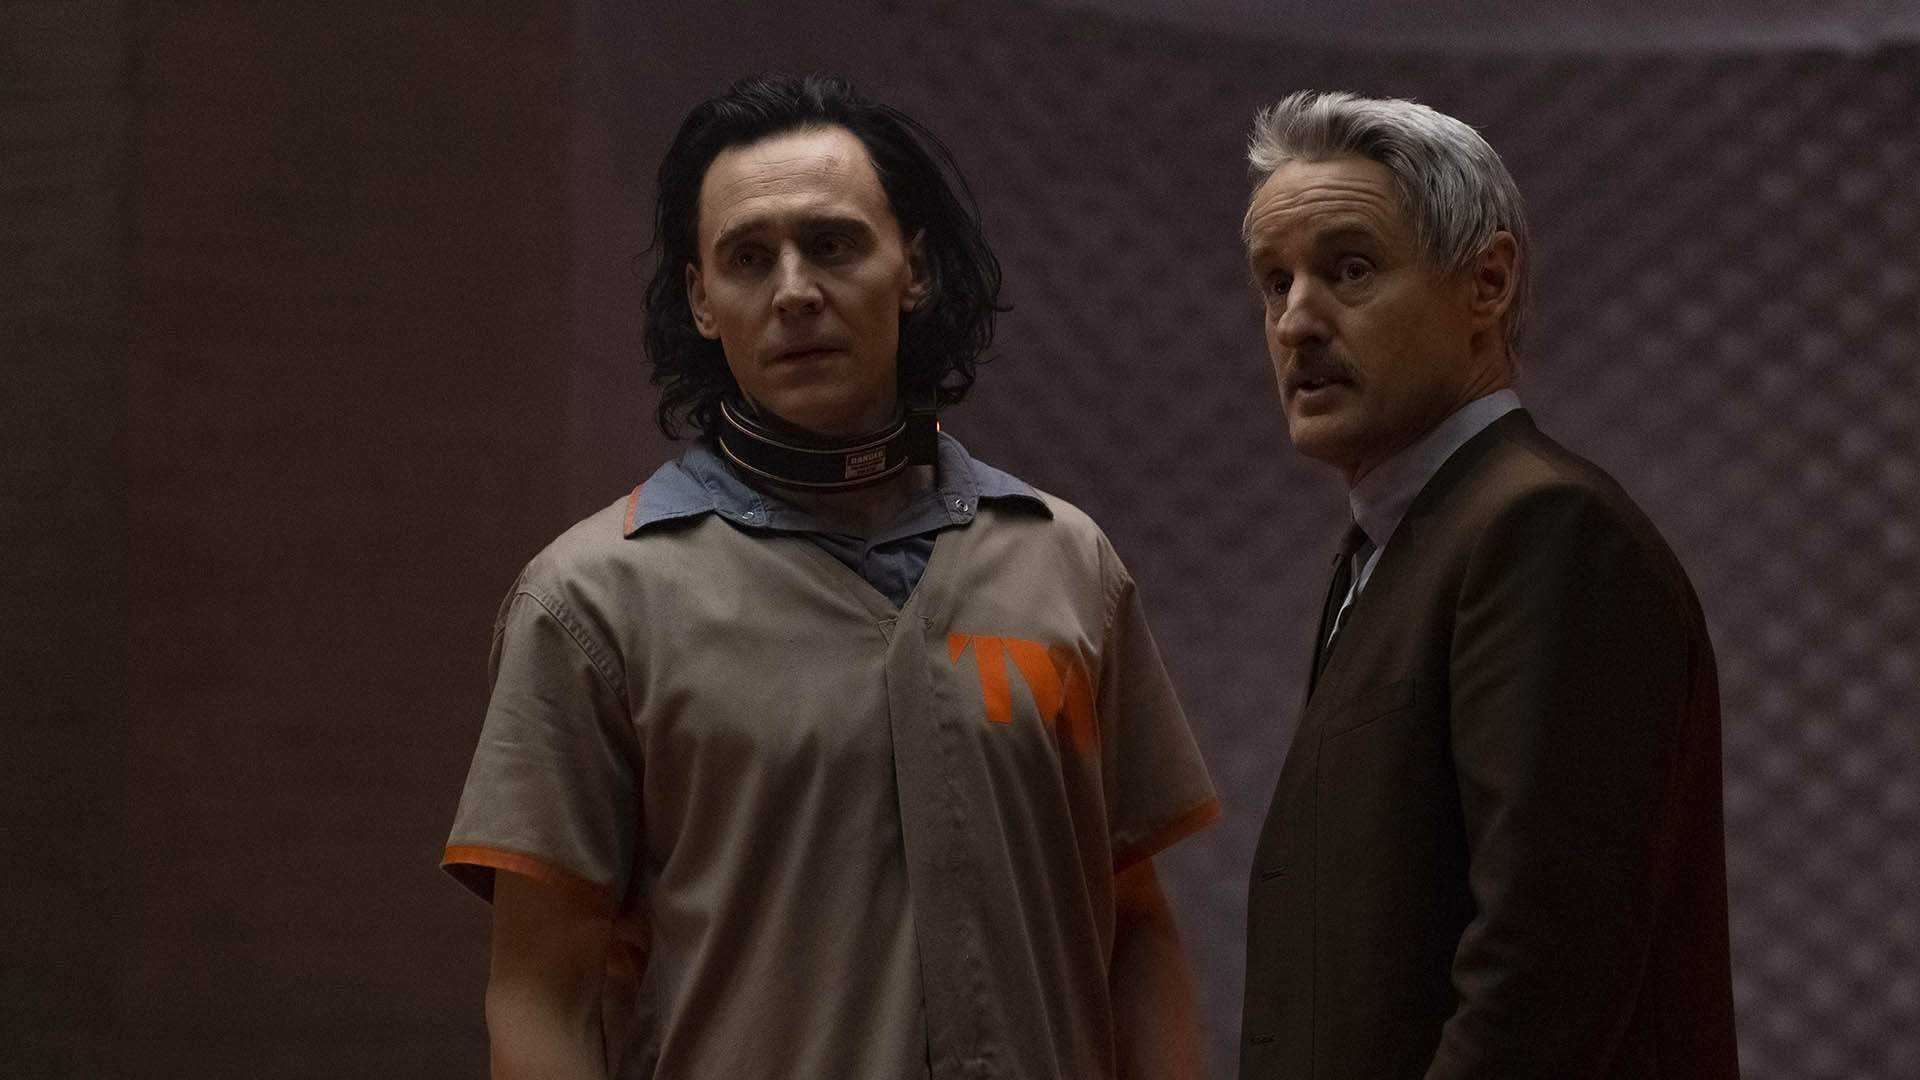 The Full Trailer for 'Loki' Sends Marvel's Favourite Trickster on a Time-Travelling Adventure